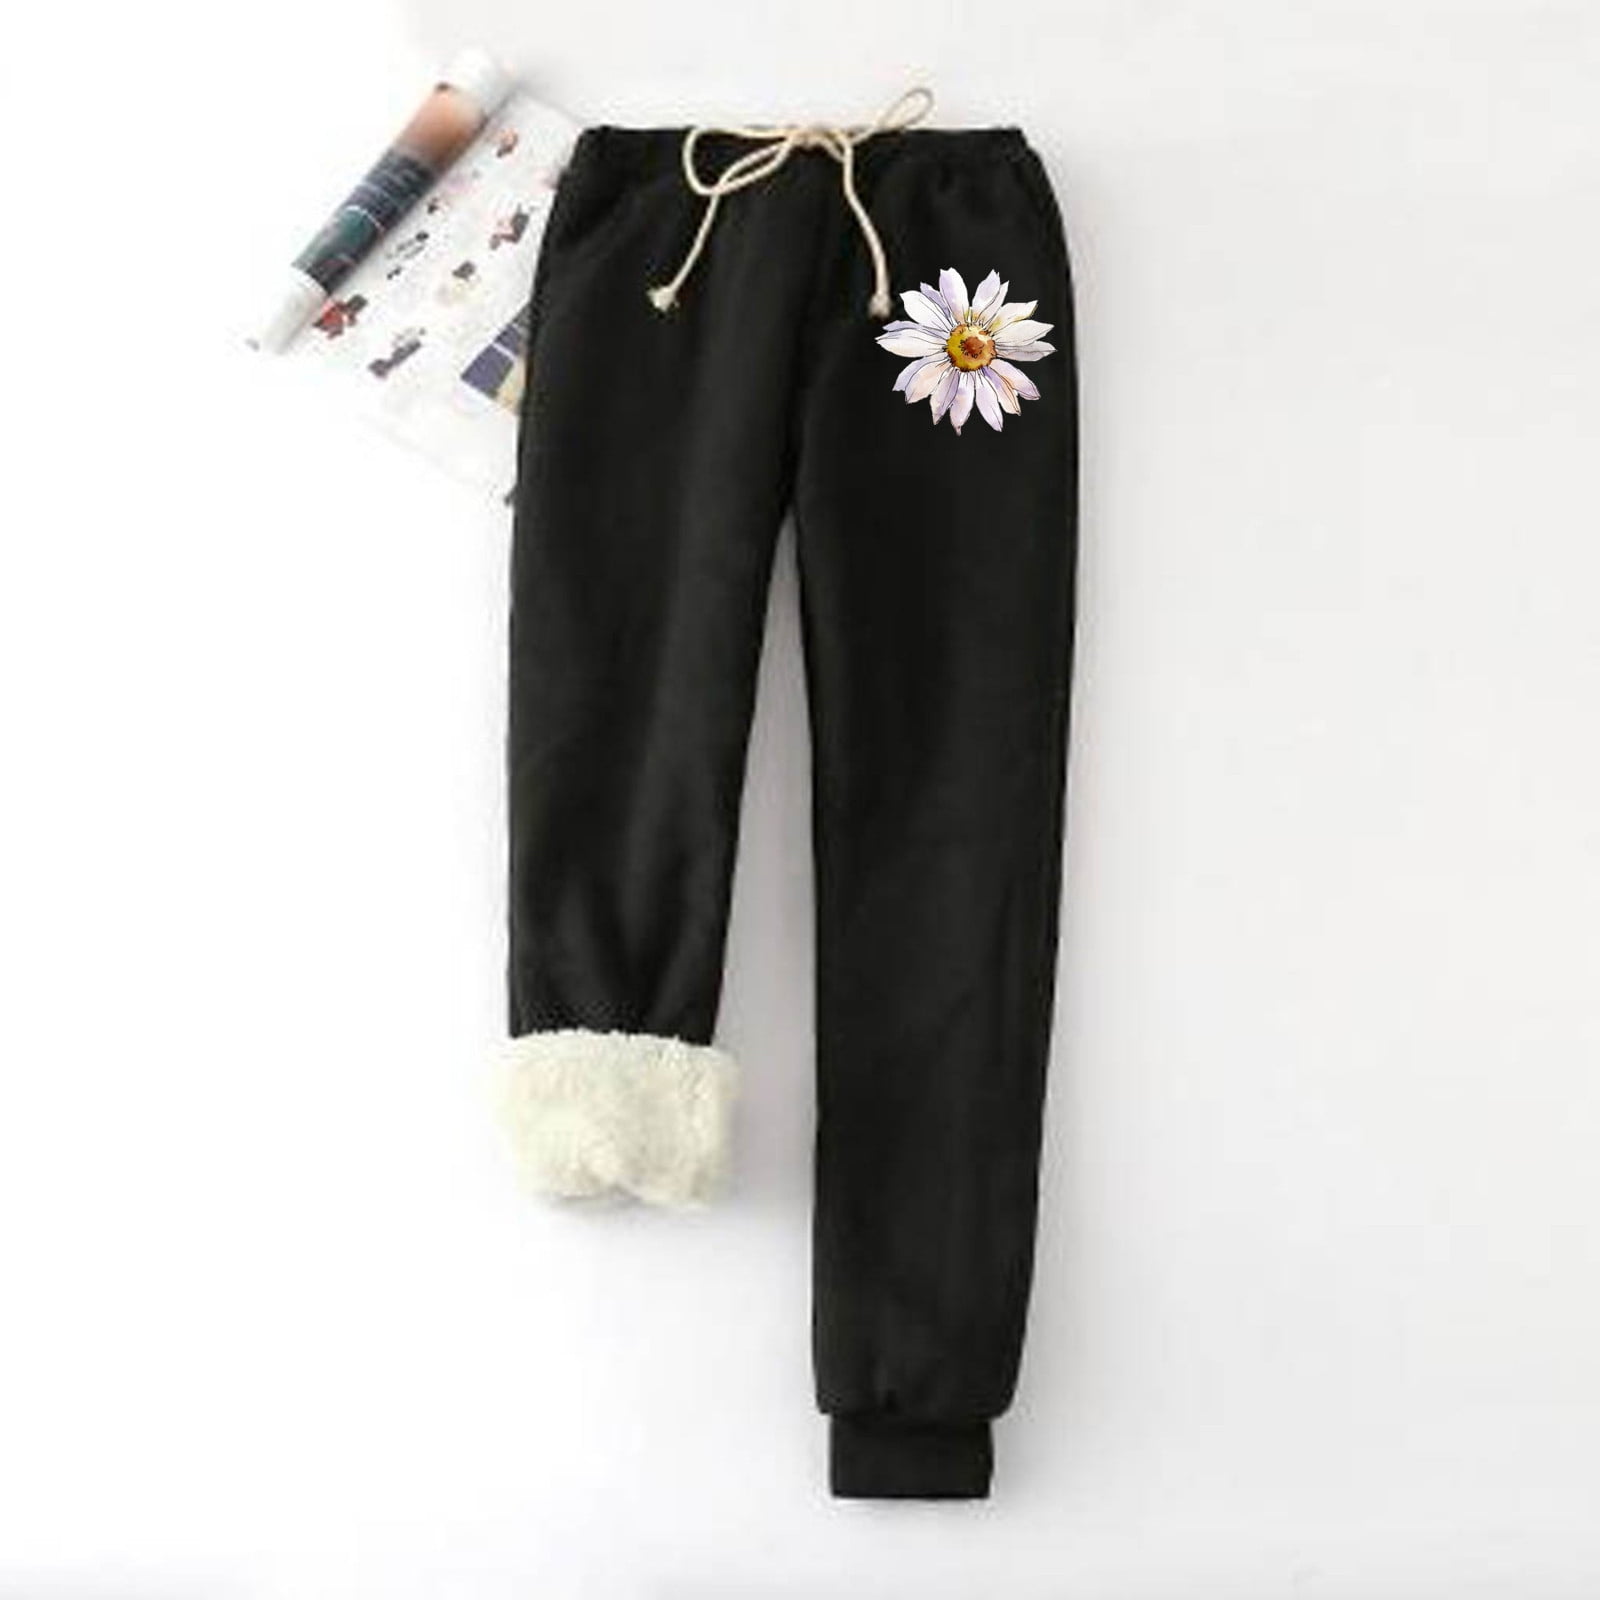 Sales! ZQGJB Women's Warm Sherpa Lined Sweatpants Cute Daisy Embroidery  High Waist Drawstring Athletic Jogger Pants Sherpa Fleece Lined Leggings  with Pockets(Black,XL) 